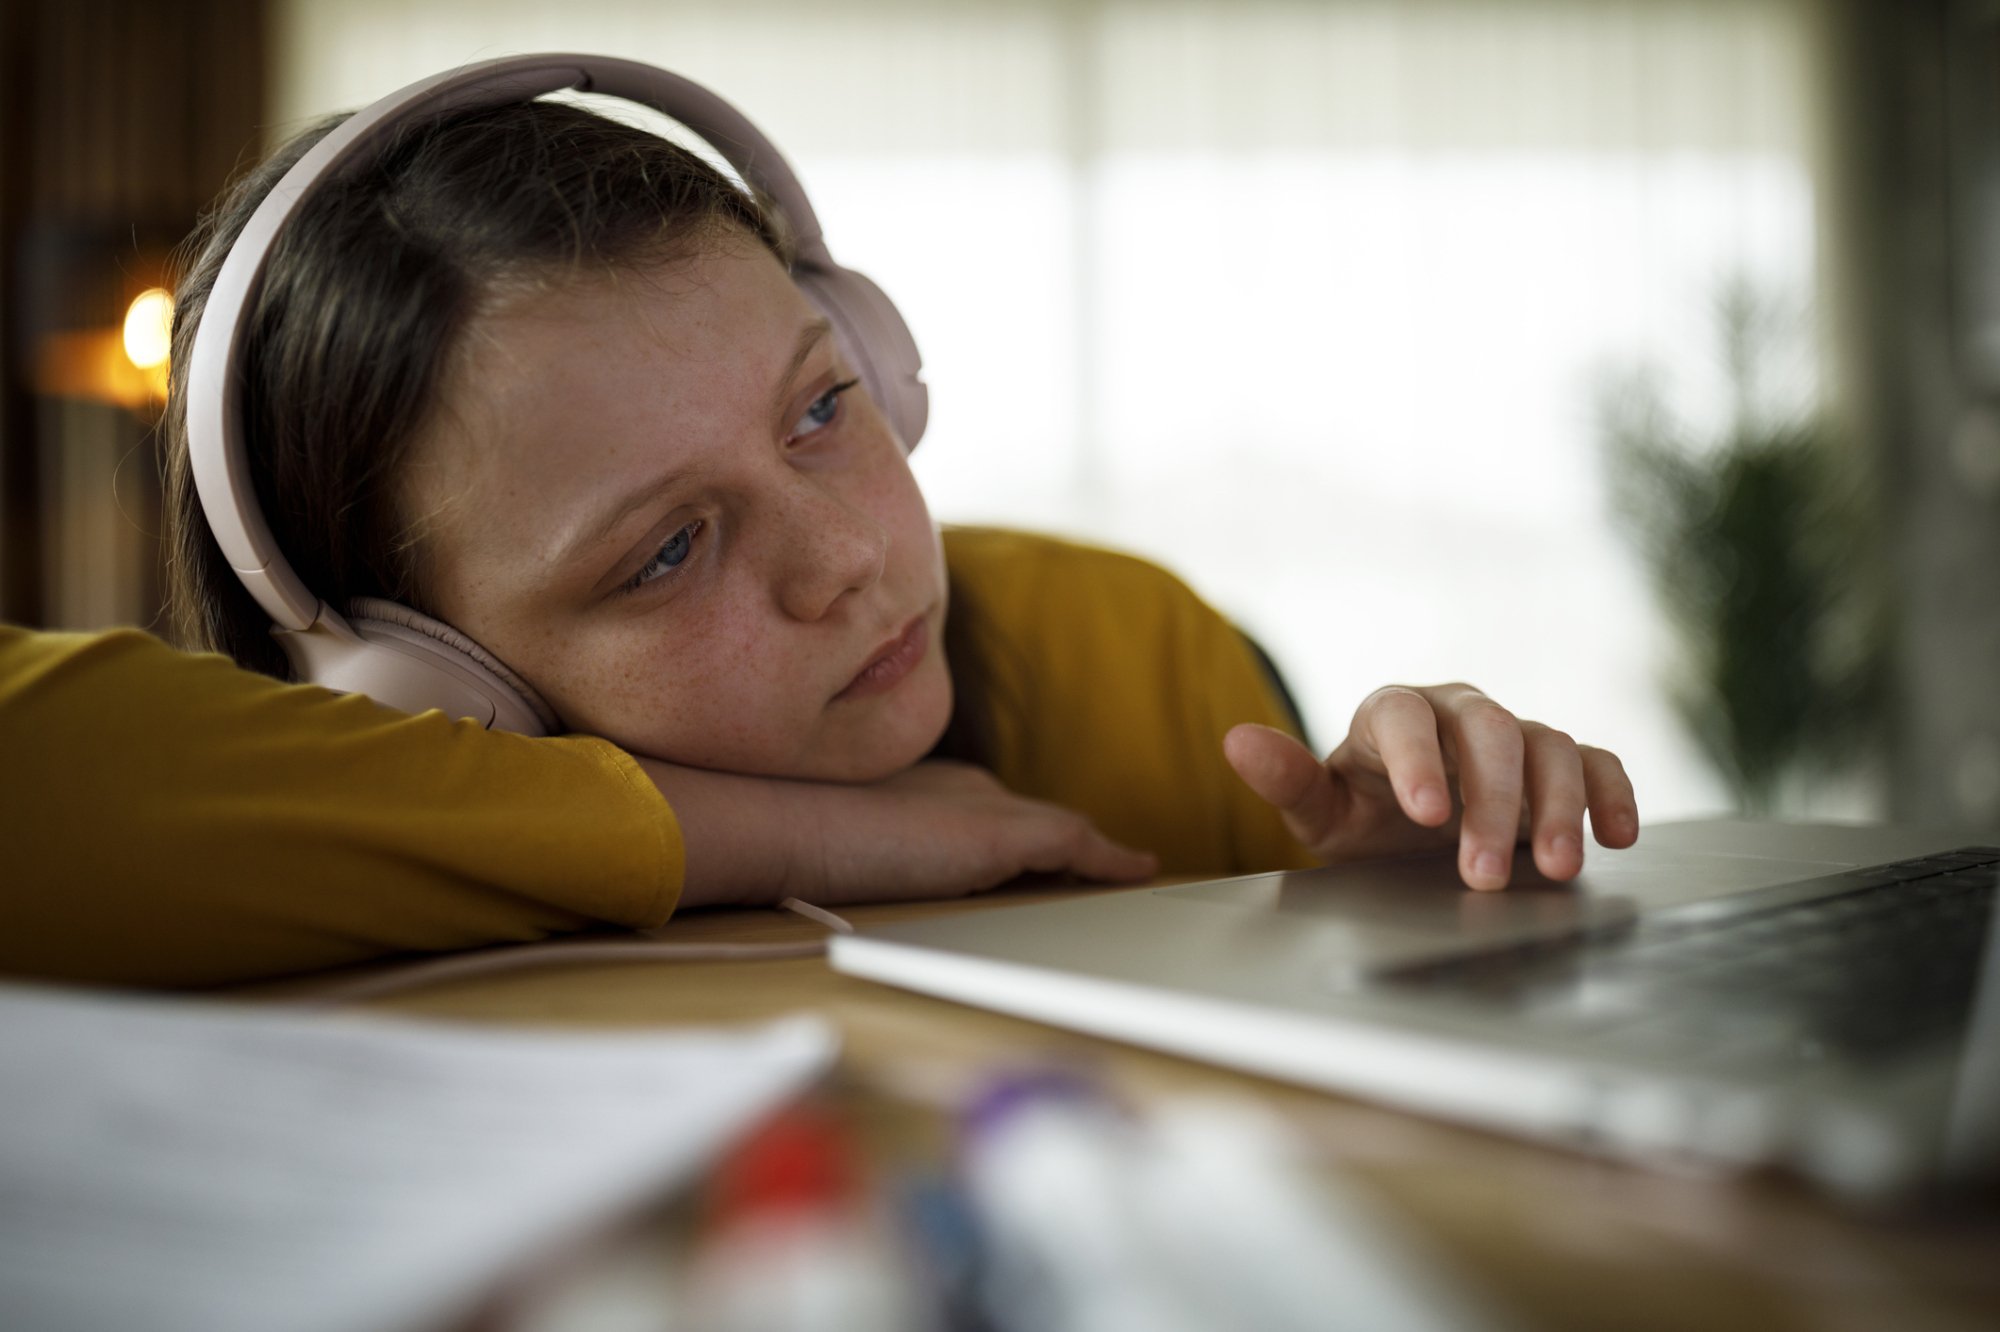 Image of bored girl resting her head on her arm looking at a laptop